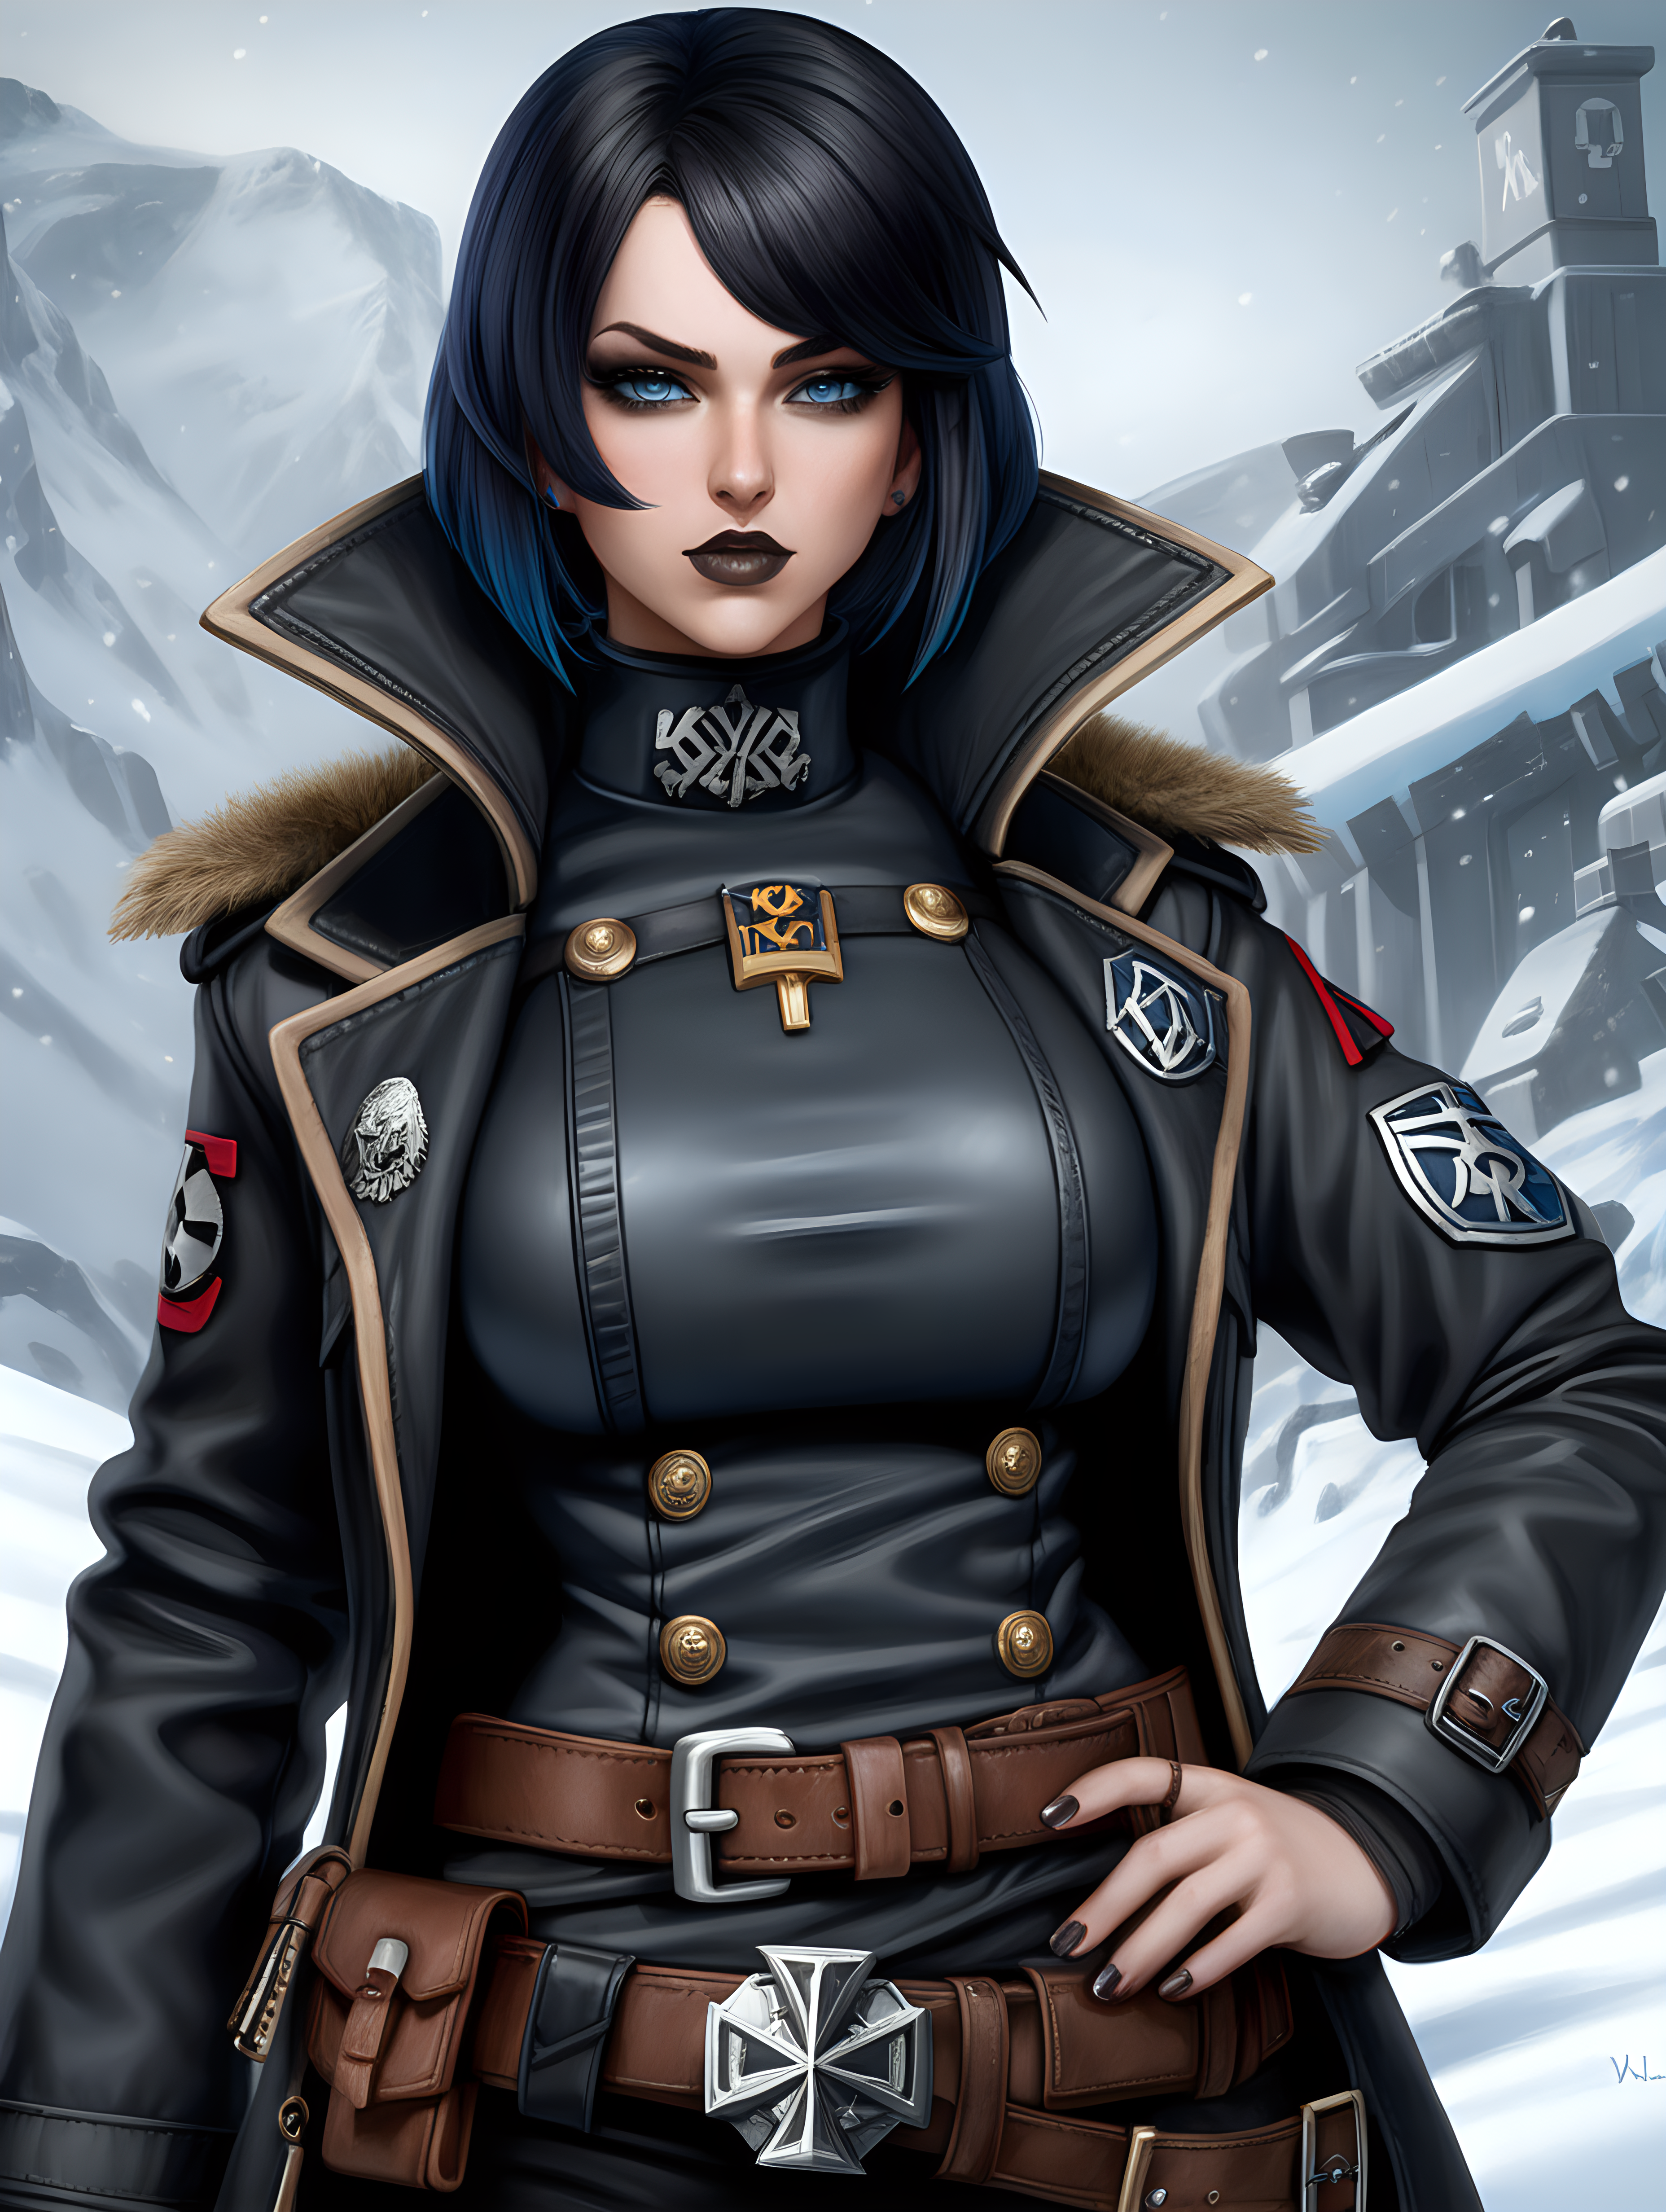 Warhammer 40K young very busty Commissar woman. She has an hourglass shape. She has a very short hair style similar to what Maya, from Borderlands 2, has. Dark black uniform. Dark brown belt has a lot of pouches, grenades, and a black holster attached. Dark brown bandolier around waist. Her dark black uniform jacket fits perfectly and is closed up. She has a lot of eye shadow. Background scene is snowy trench line. She has icy blue eyes. Her uniform has some Norse runes. She is wearing warm clothes. Valk nut rune is on collar of her black jacket. She has slightly faded greyish matte lipstick. Her uniform top is dark leather brown and skin tight. She has raven black hair with dark blue colored hair tip highlights. 